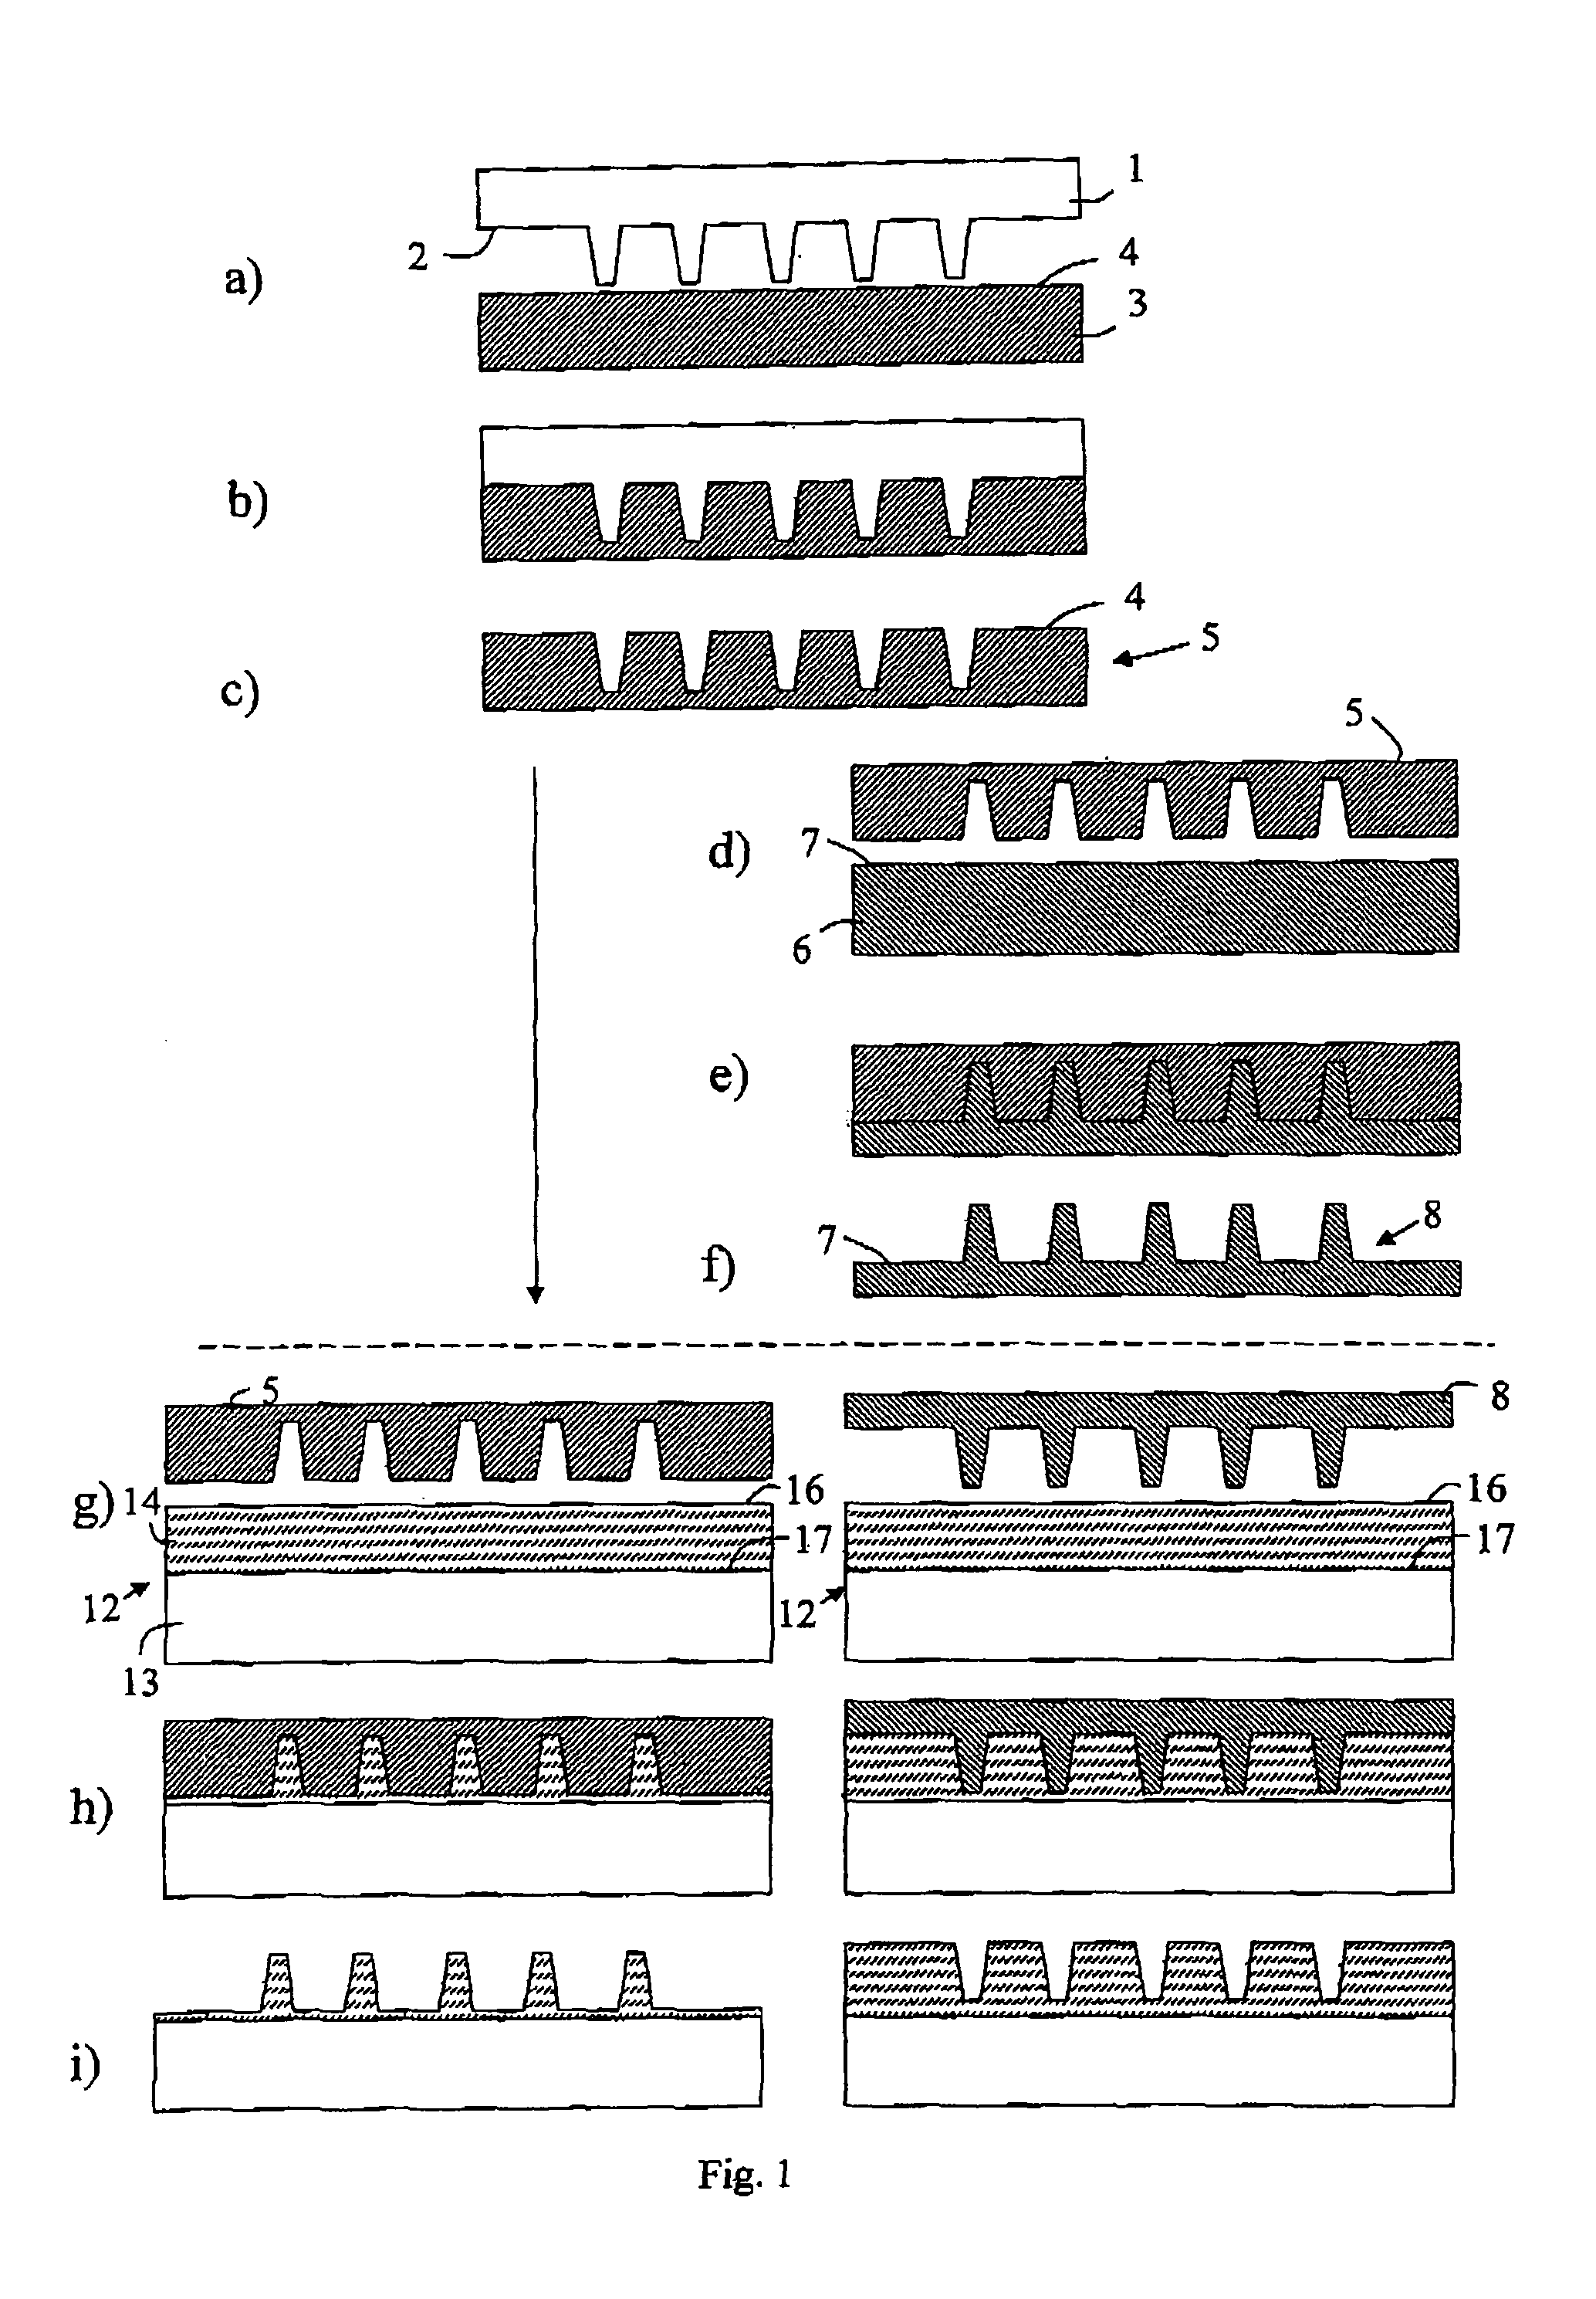 Imprint stamp comprising cyclic olefin copolymer